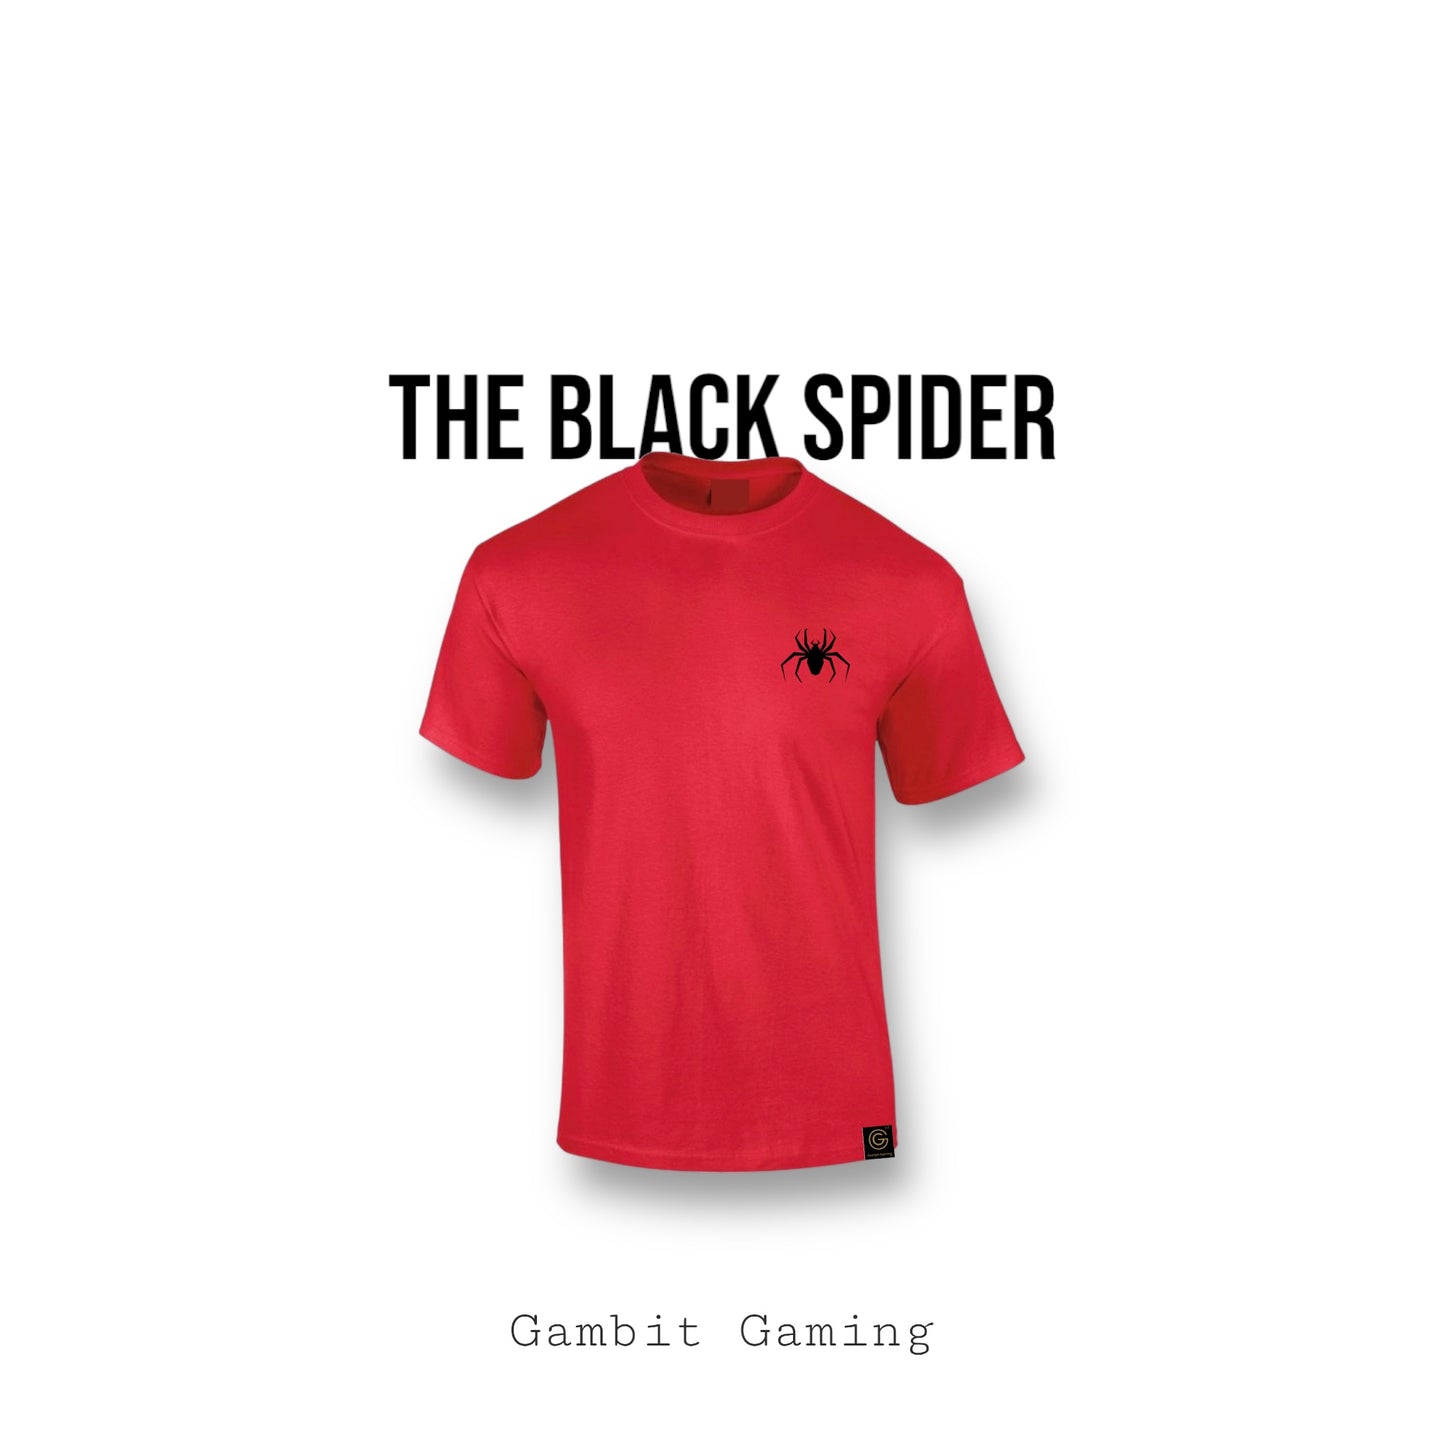 The Black Spider - Gambit Gaming